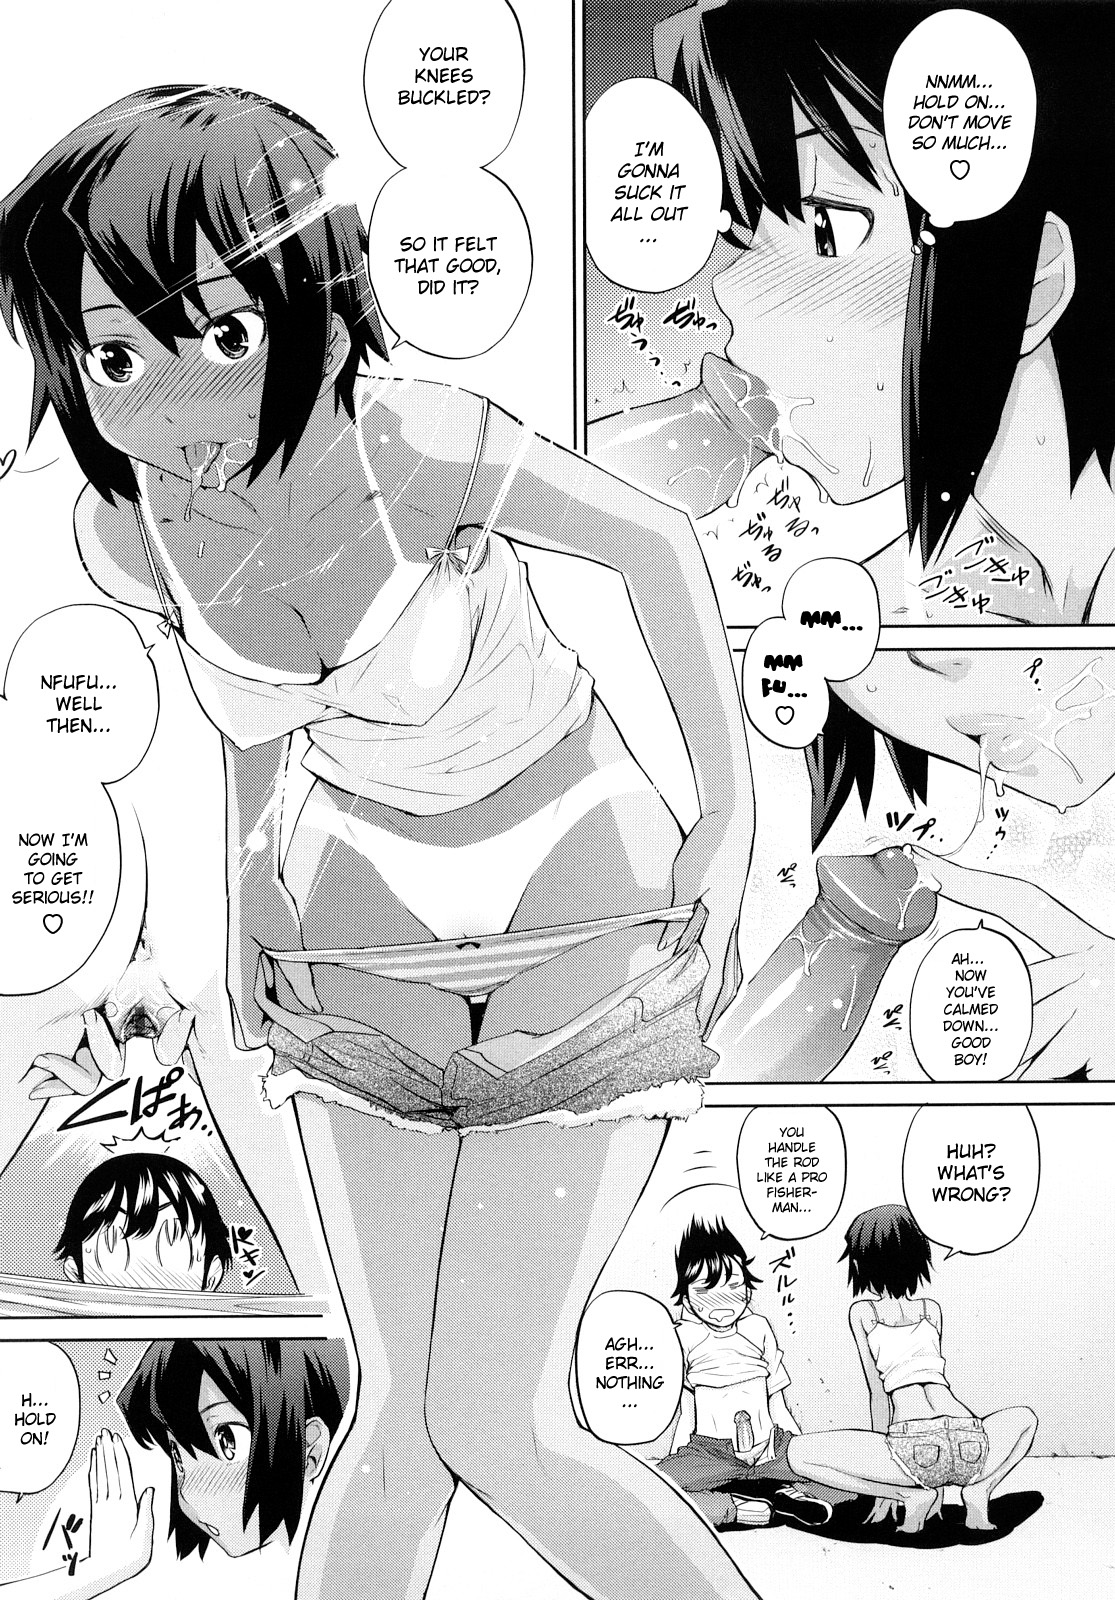 [Teri Terio] Uminchu ch.4 -Umi de Ae tara (If we could meet by the sea)- [ENG] (tank scans) [てりてりお]  うみんチュッ ♡